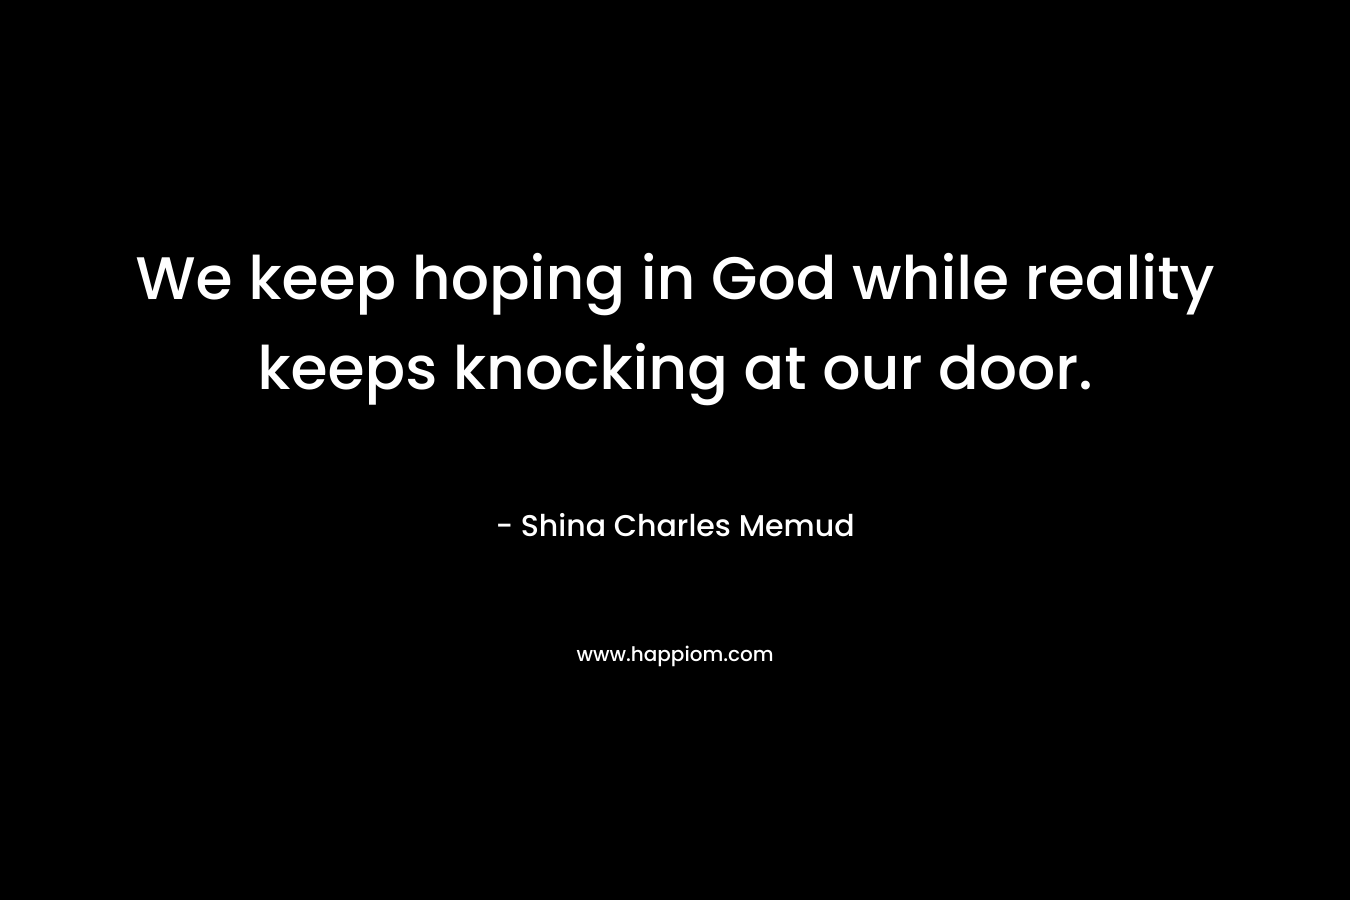 We keep hoping in God while reality keeps knocking at our door. – Shina Charles Memud